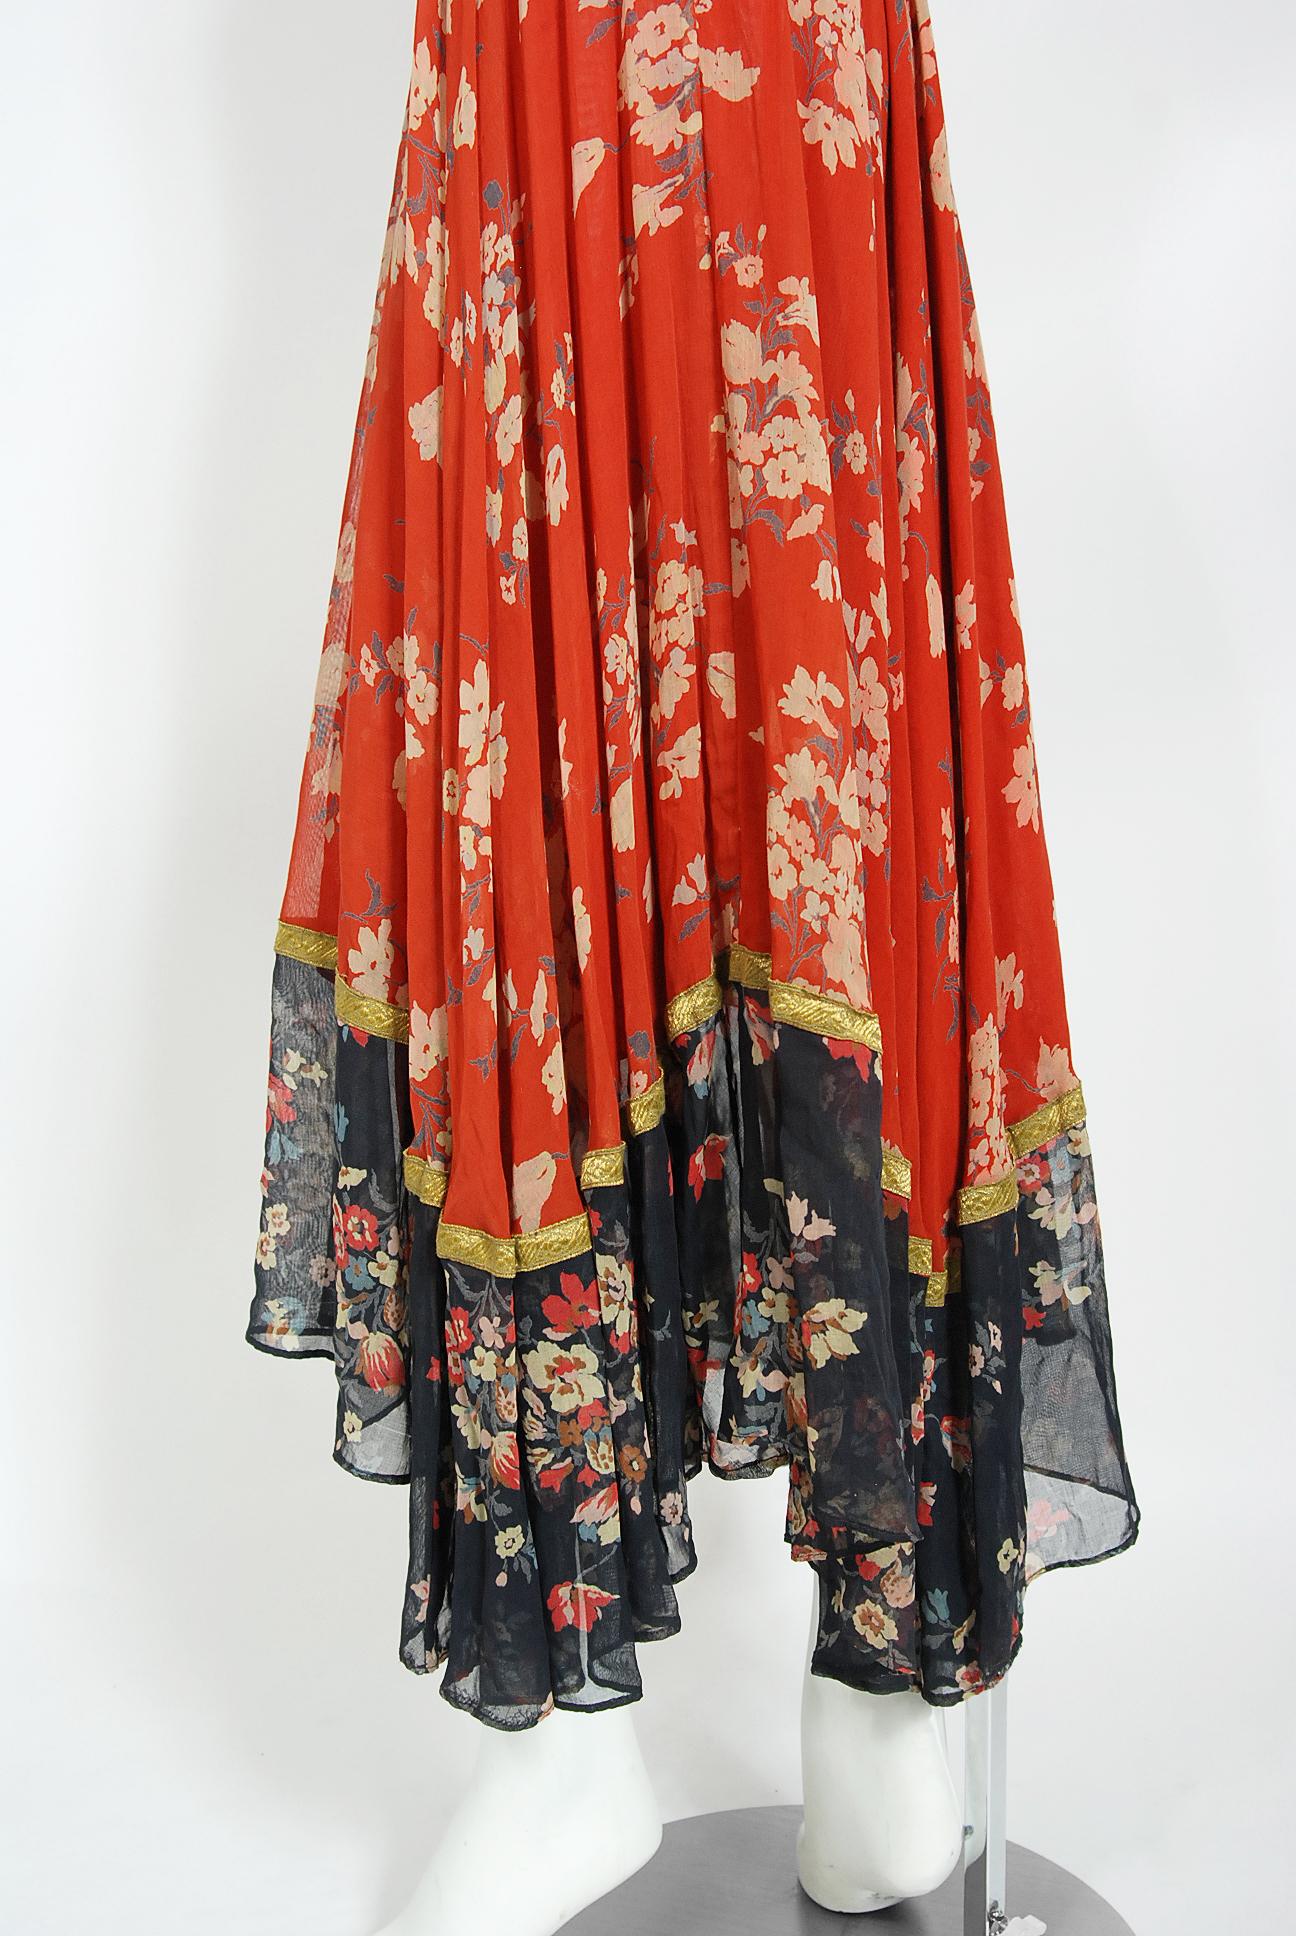 Vintage 1971 Thea Porter Documented Black & Red Floral Print Cotton Gypsy Dress  6